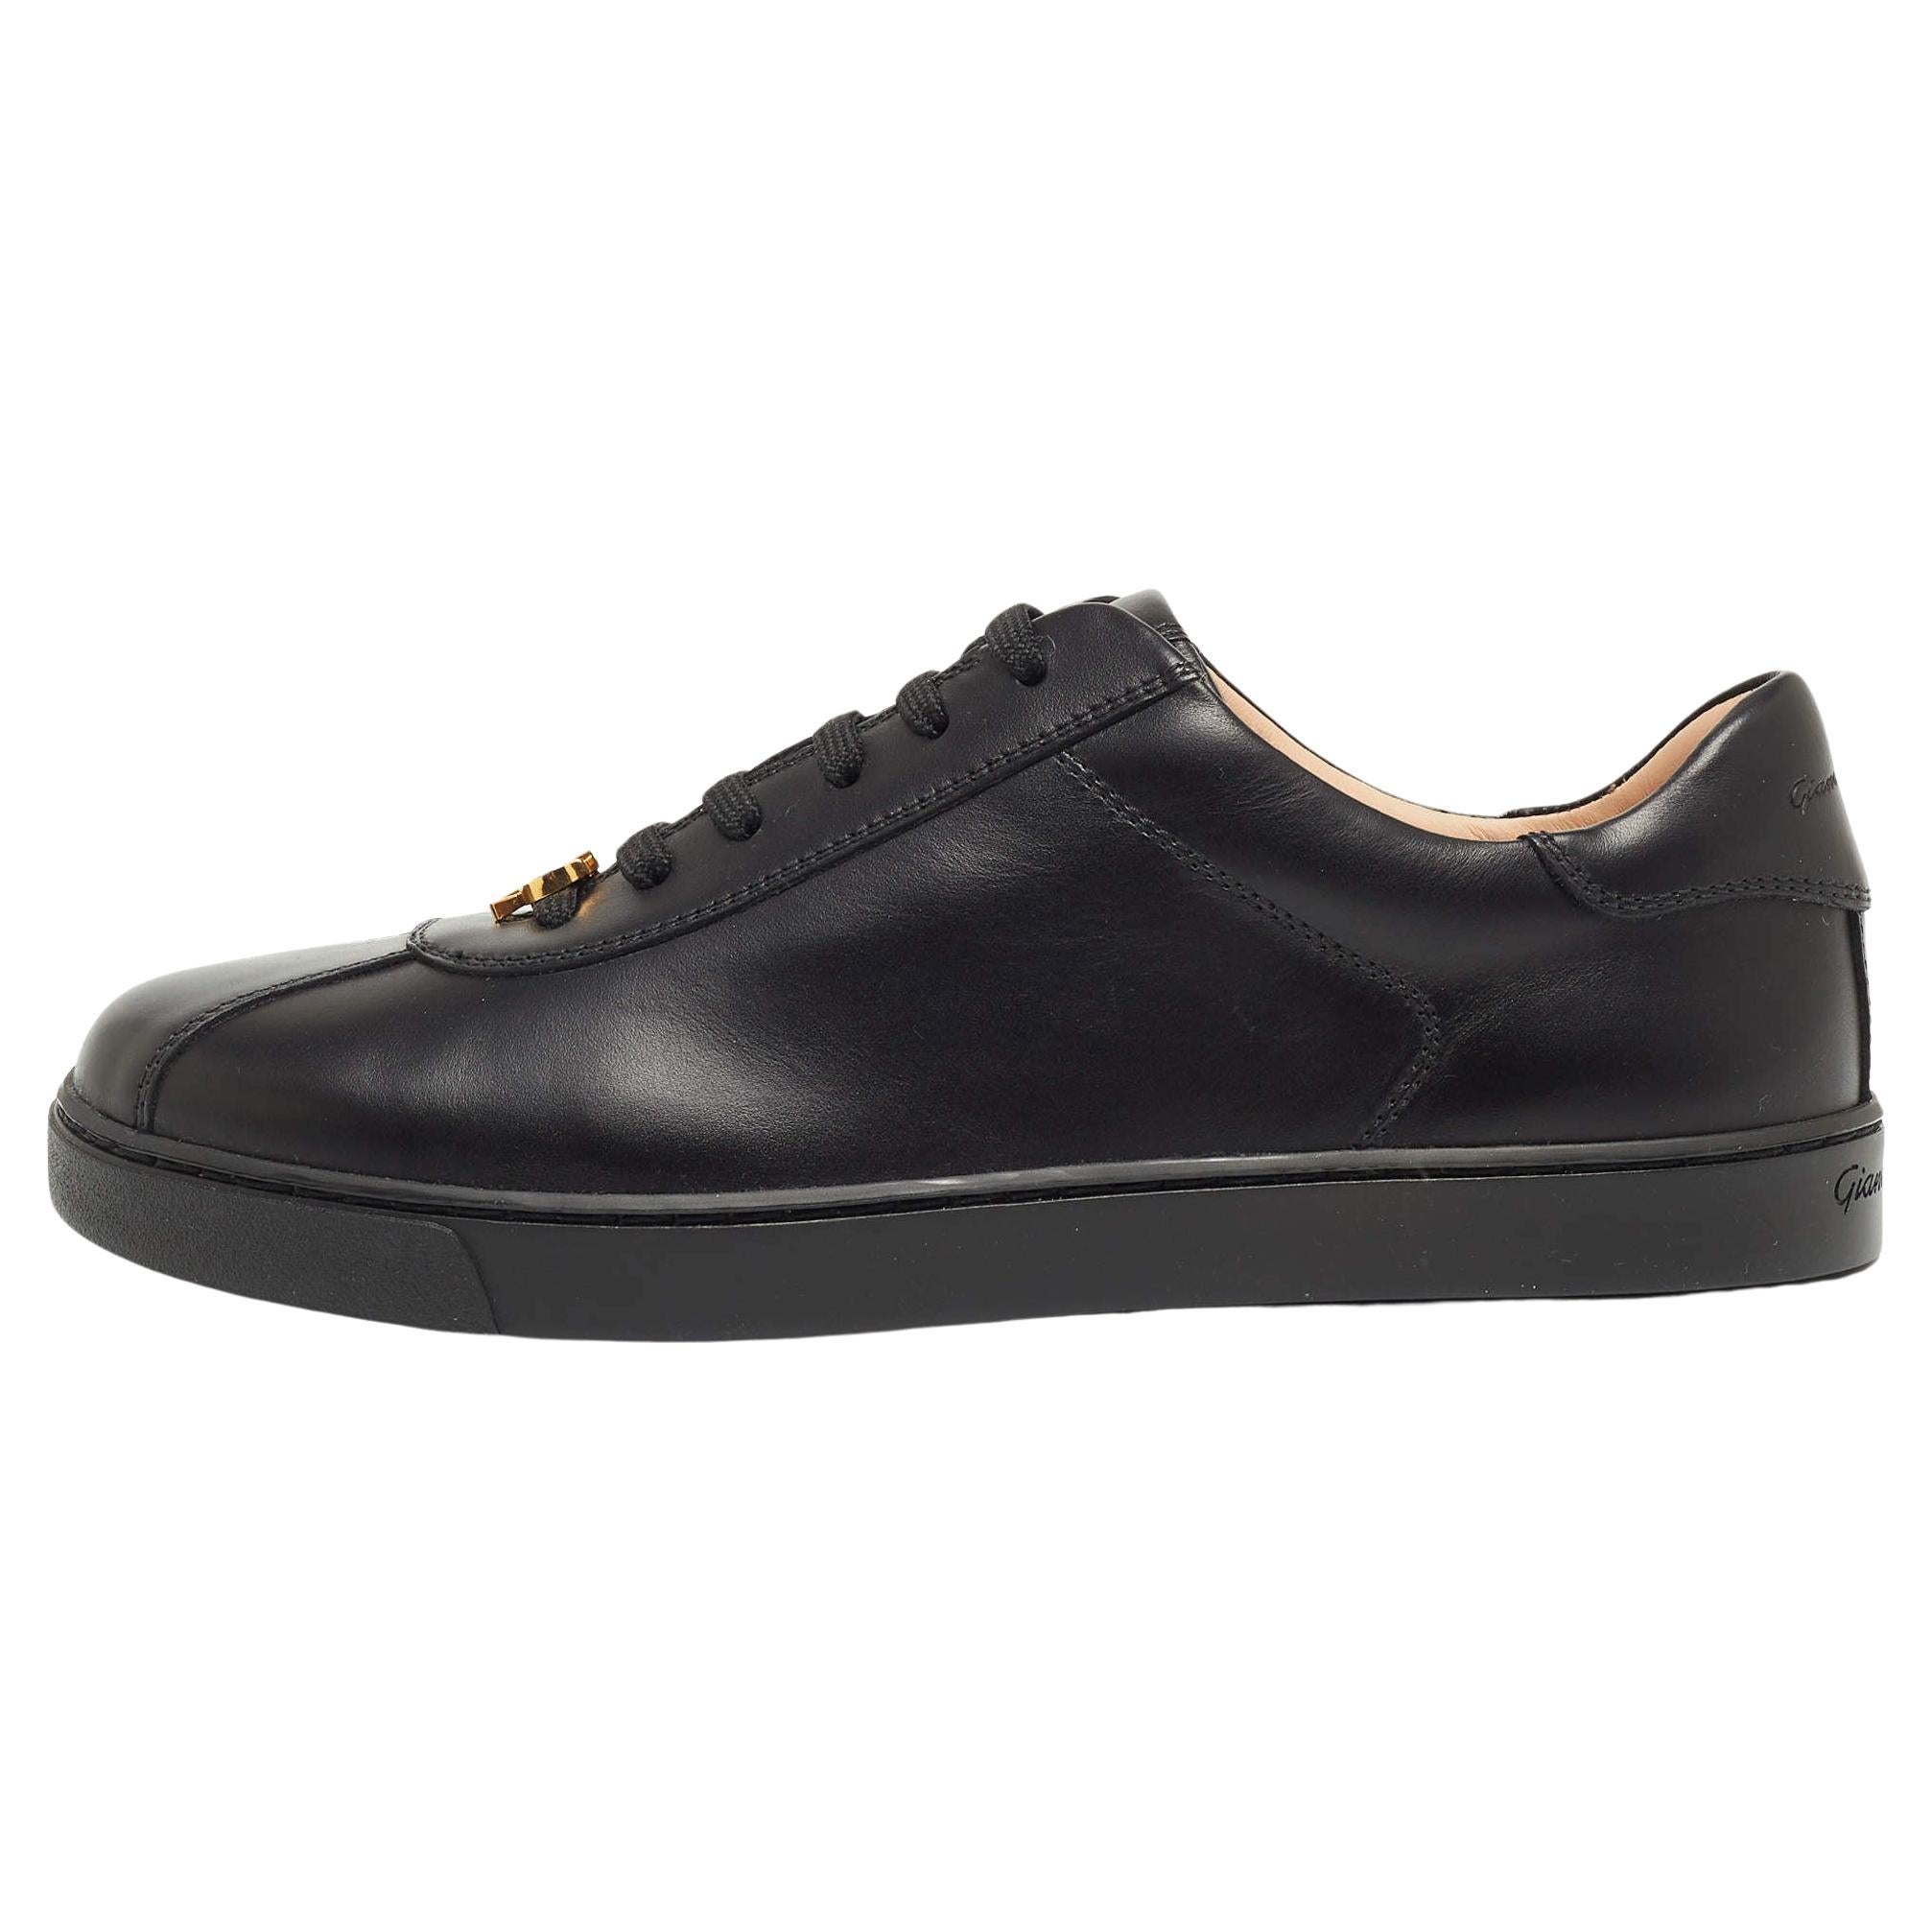 Gianvito Rossi Black Leather Low Top Sneakers Size 38.5 For Sale